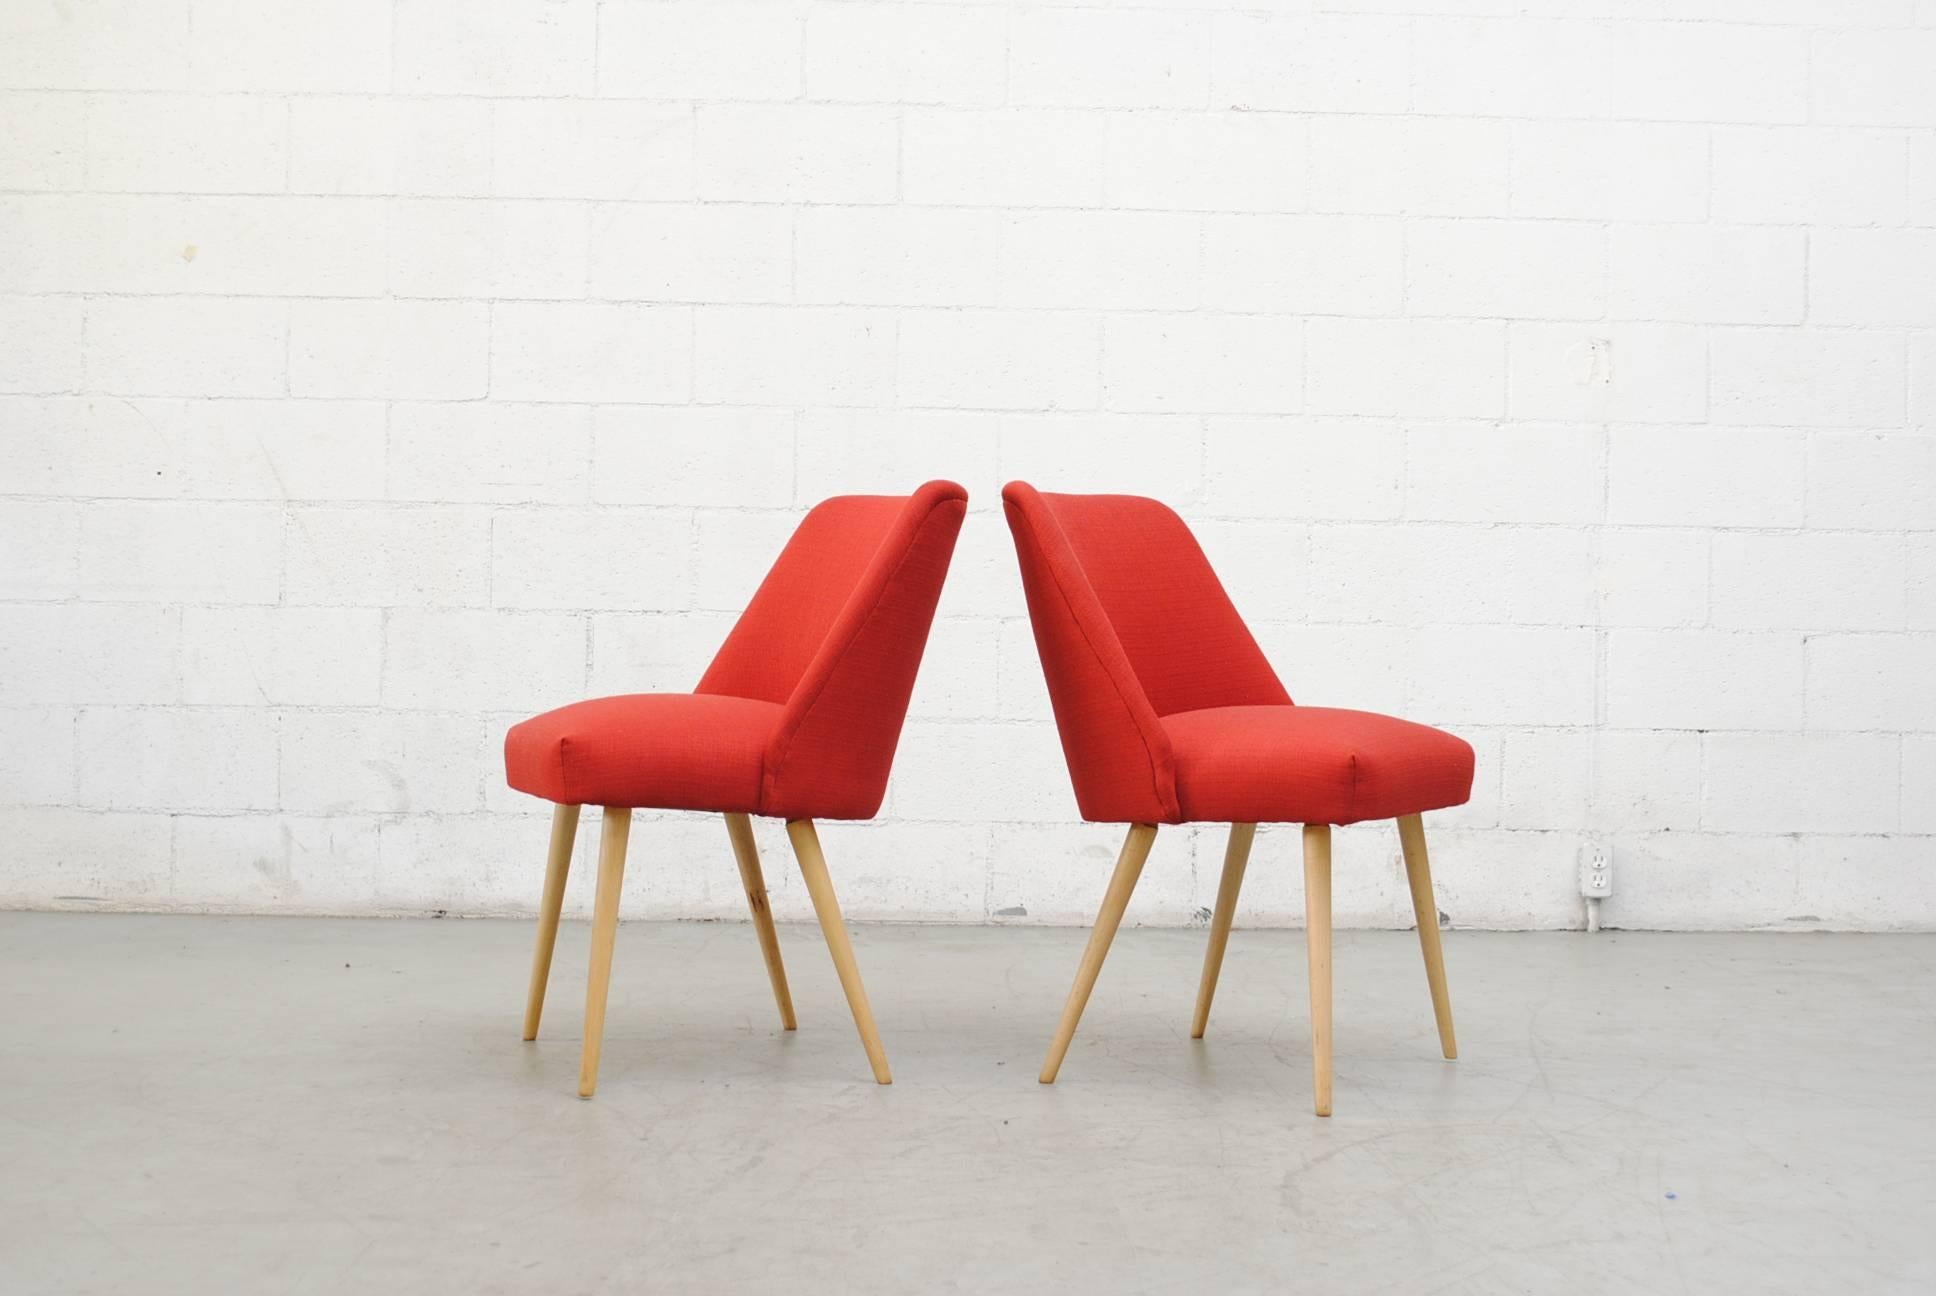 Mid-Century Modern dining or cocktail chairs. Newly upholstered in lipstick red. Lightly refinished natural birch tapered legs. Otherwise in original condition.